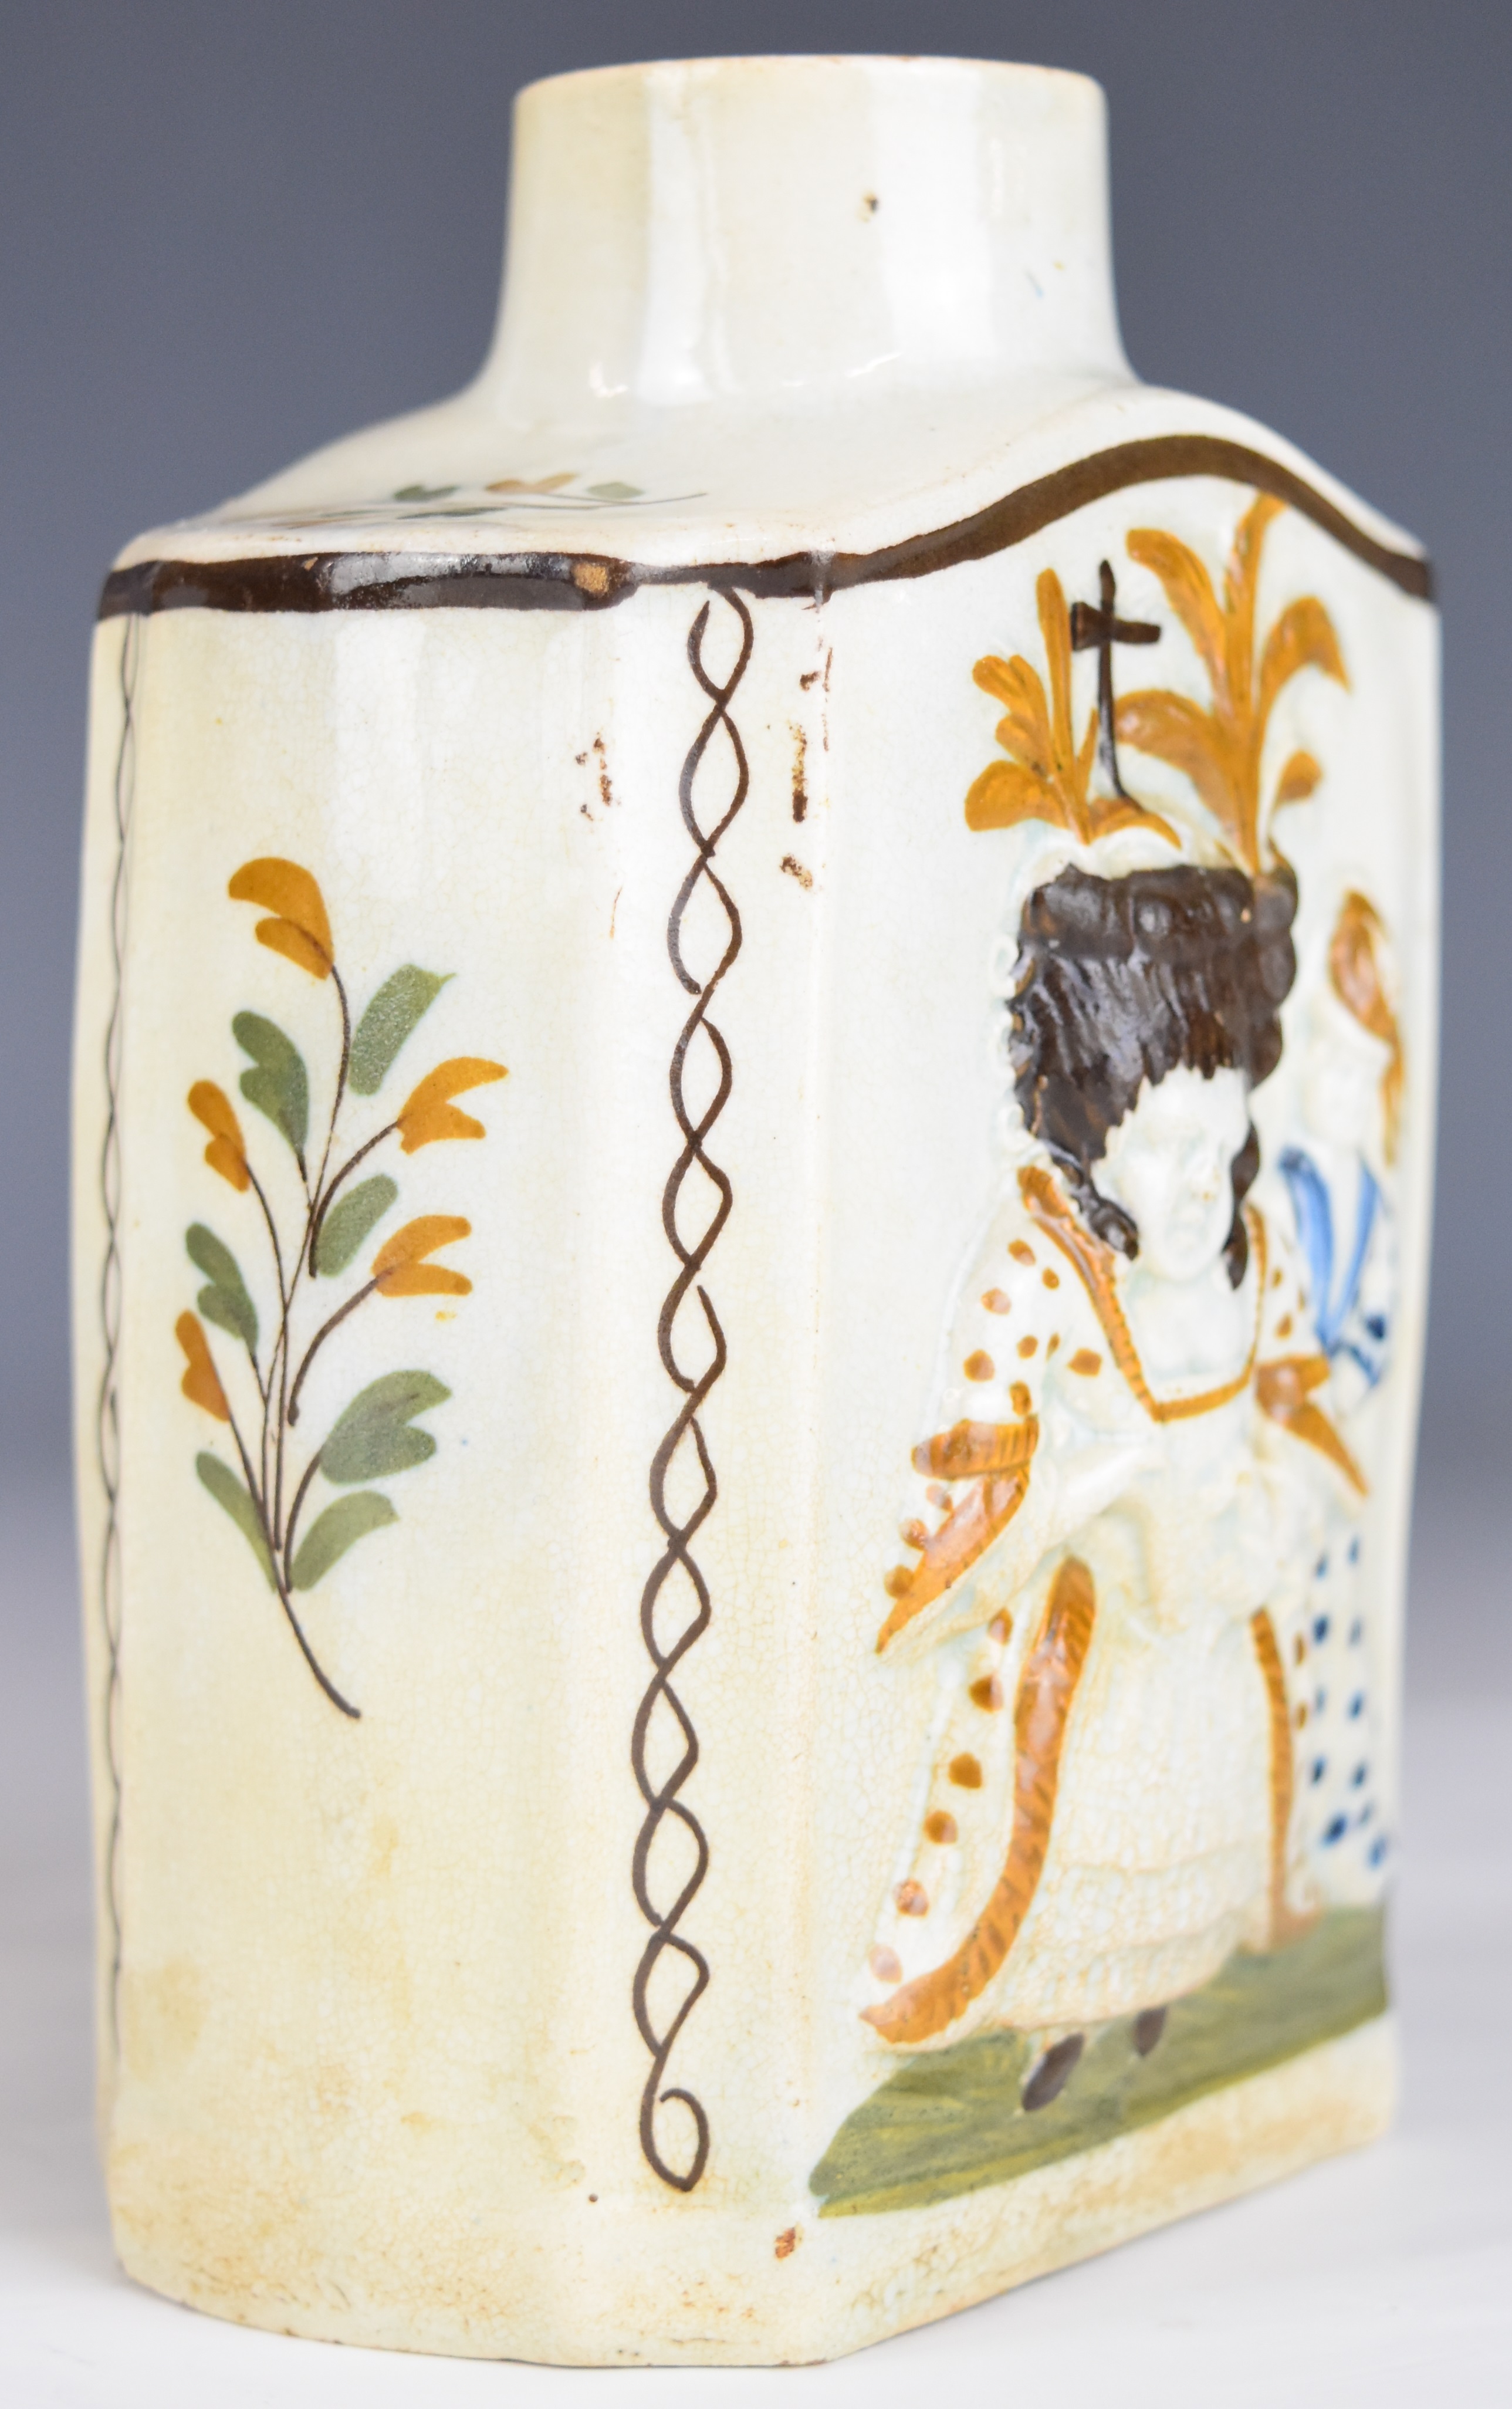 A late 18thC Prattware tea caddy with relief decoration of figures, probably King George III and - Image 3 of 5